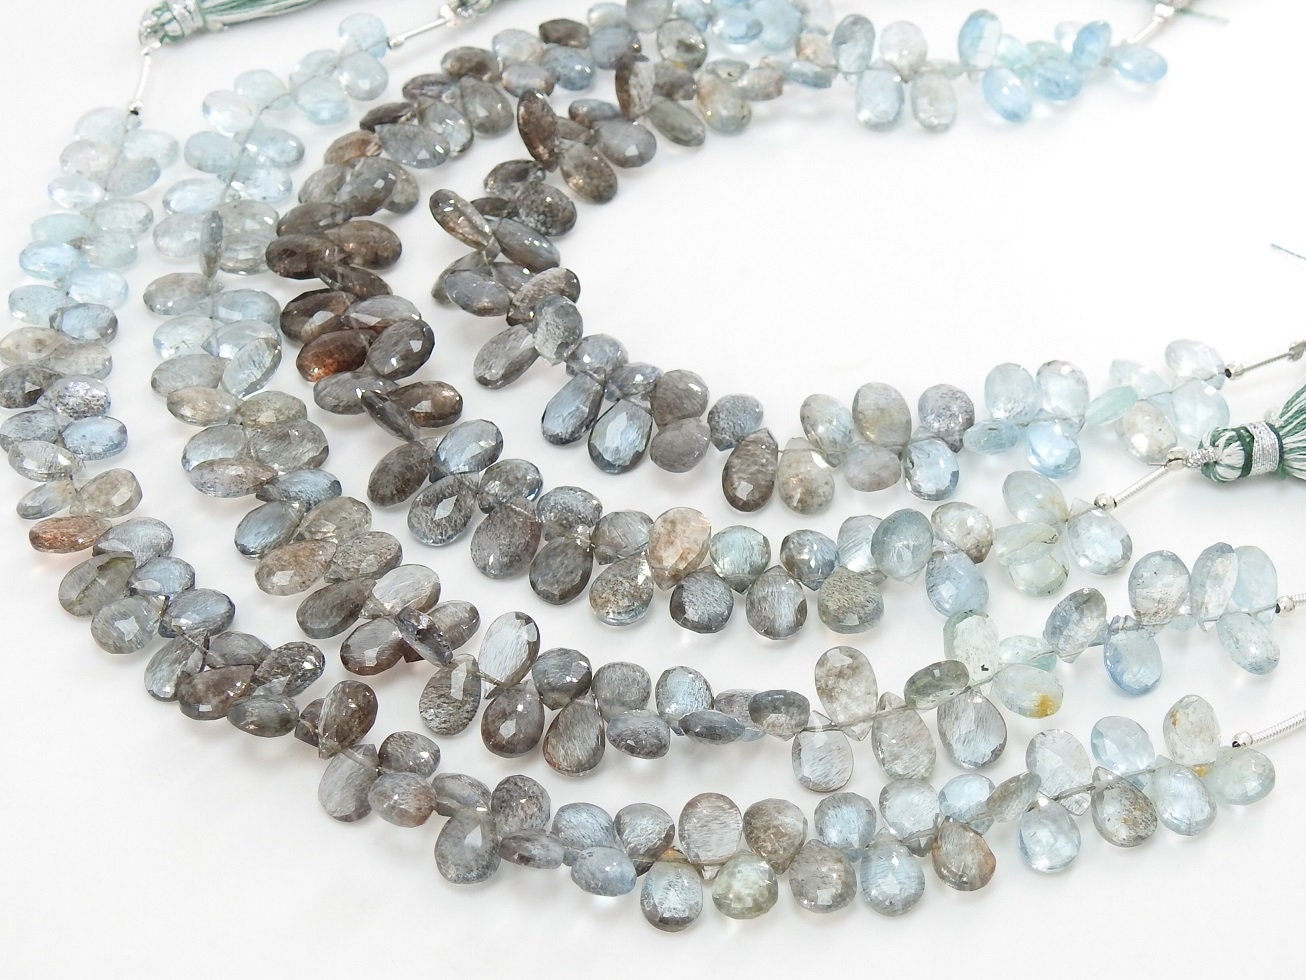 Moss Aquamarine Faceted Teardrops,Multi Shaded,Loose Stone,Gemstone For Jewelry,100%Natural,8Inch 11X7To10X6MM Approx,PME(BR4) | Save 33% - Rajasthan Living 15